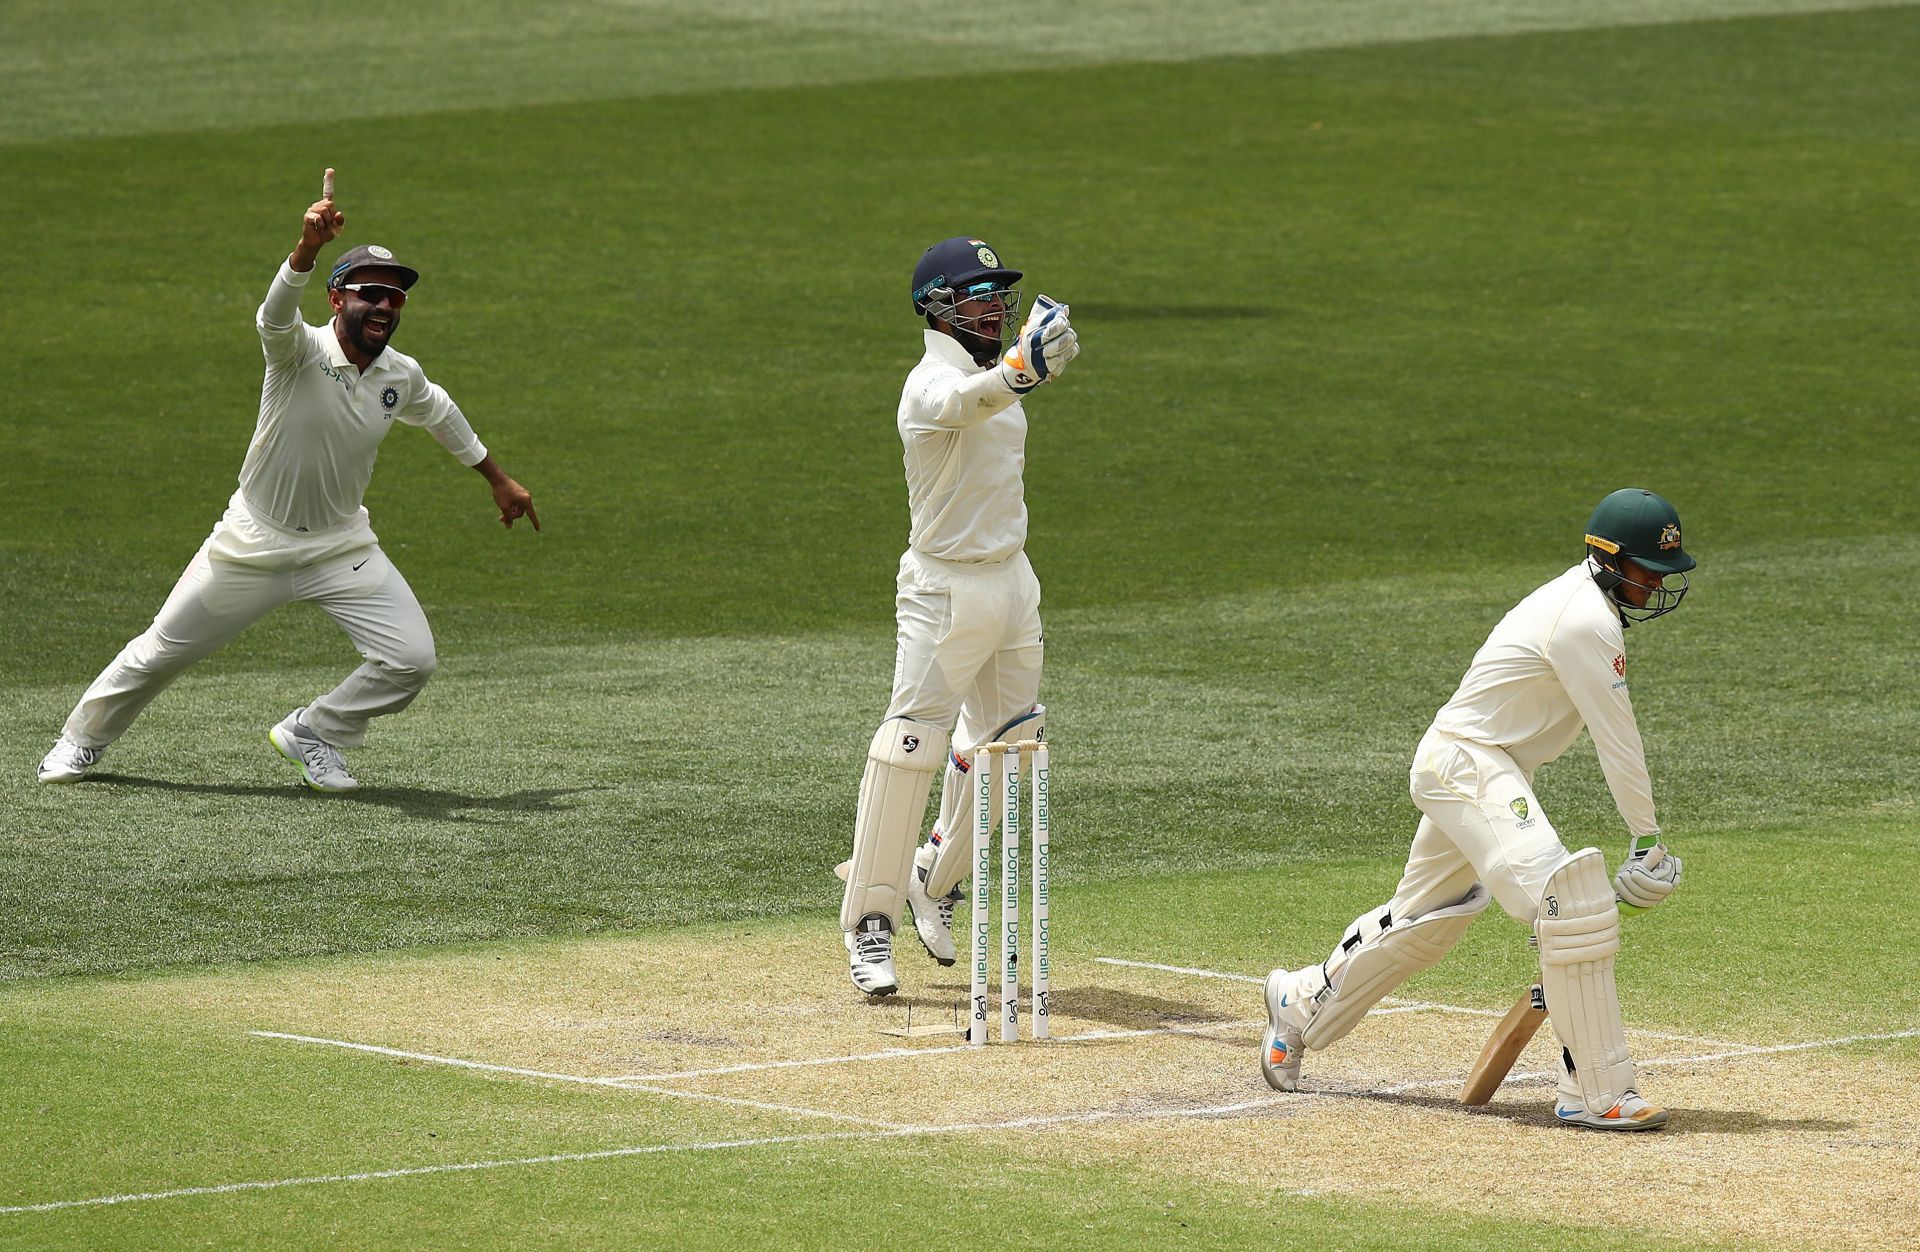 Rishabh Pant takes a catch to dismiss Usman Khawaja in the 2018 Adelaide Test. Pic: Getty Images